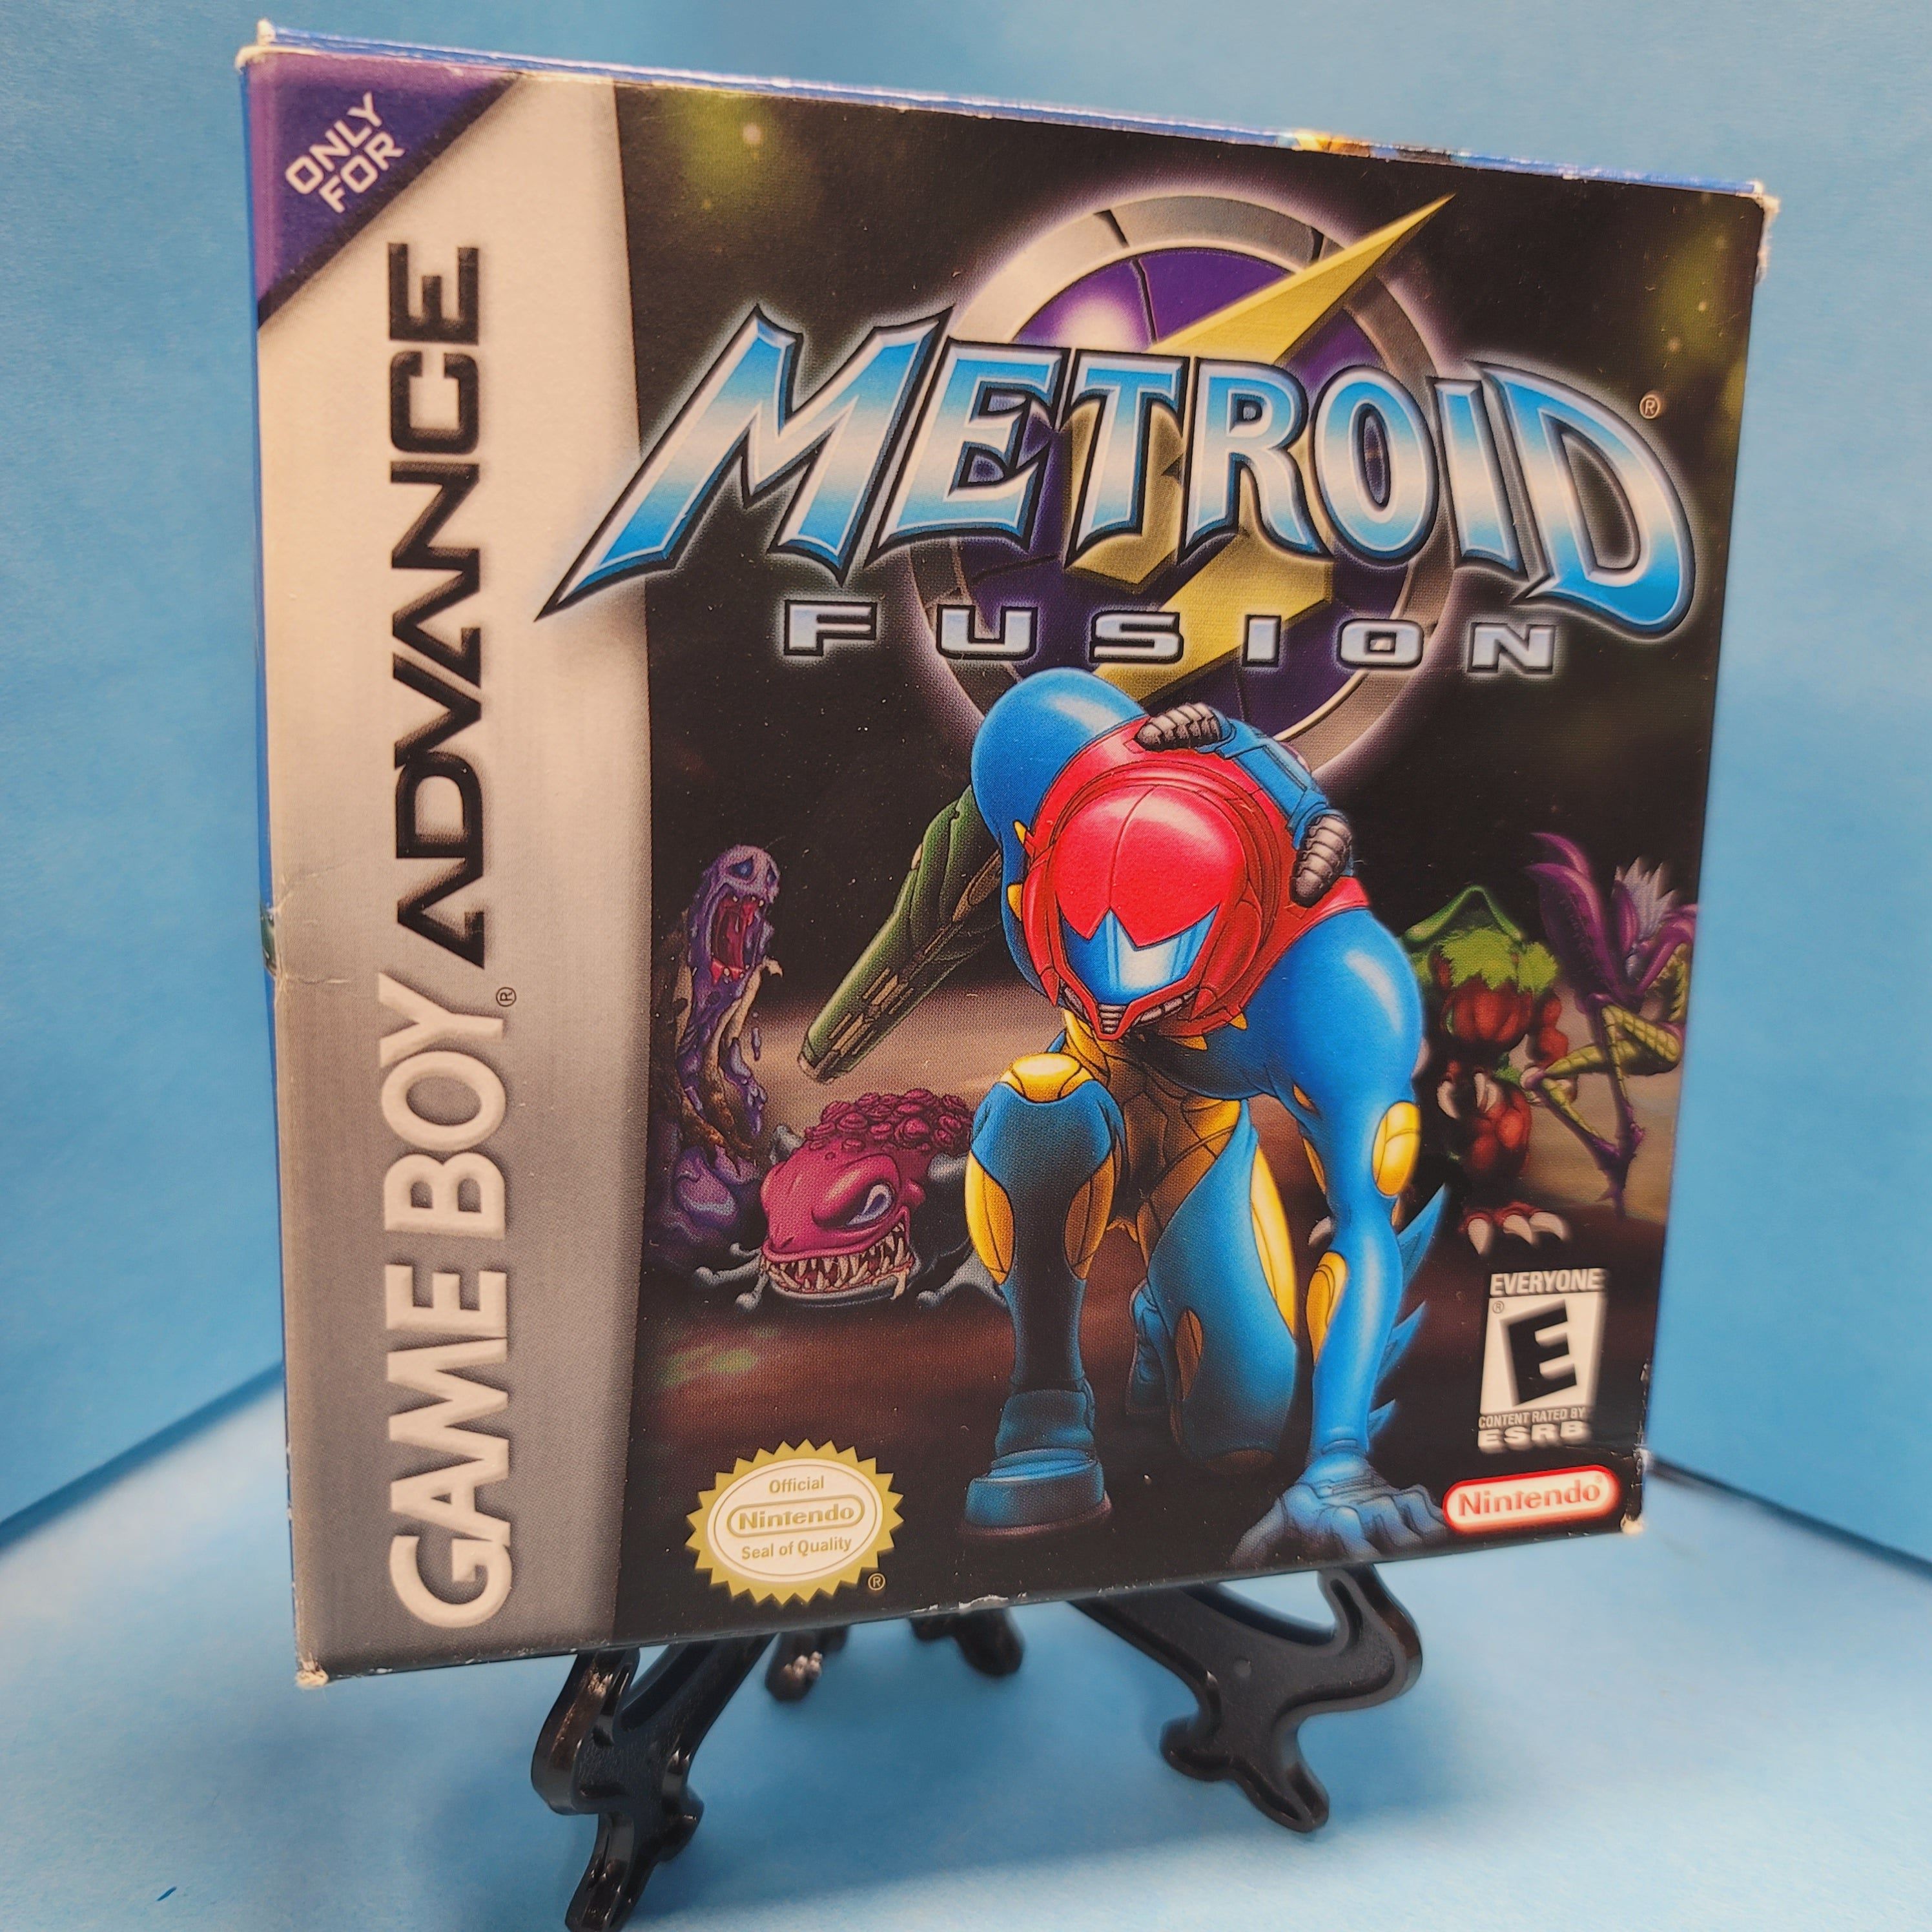 GBA - Metroid Fusion (Complete in Box / A- / With Manual)